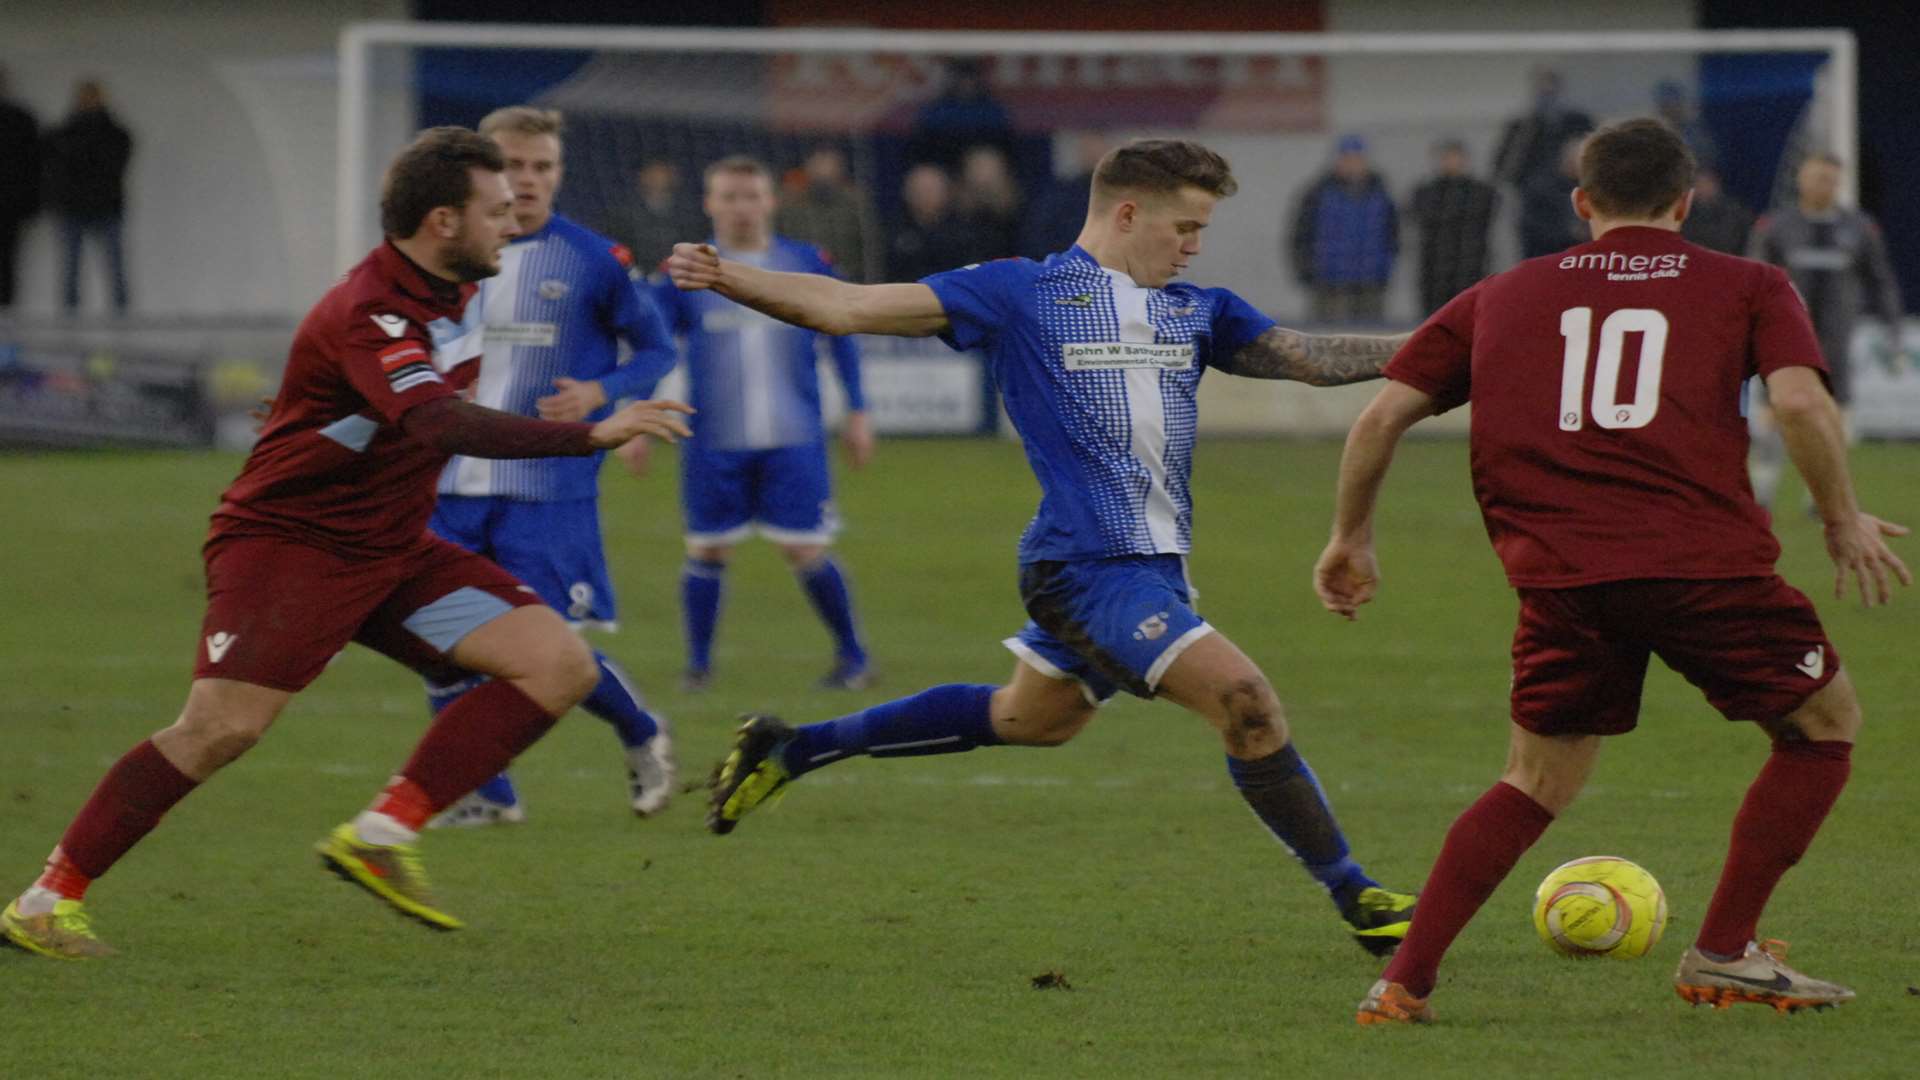 Herne Bay could not find a breakthrough against Hastings. Picture: Chris Davey.